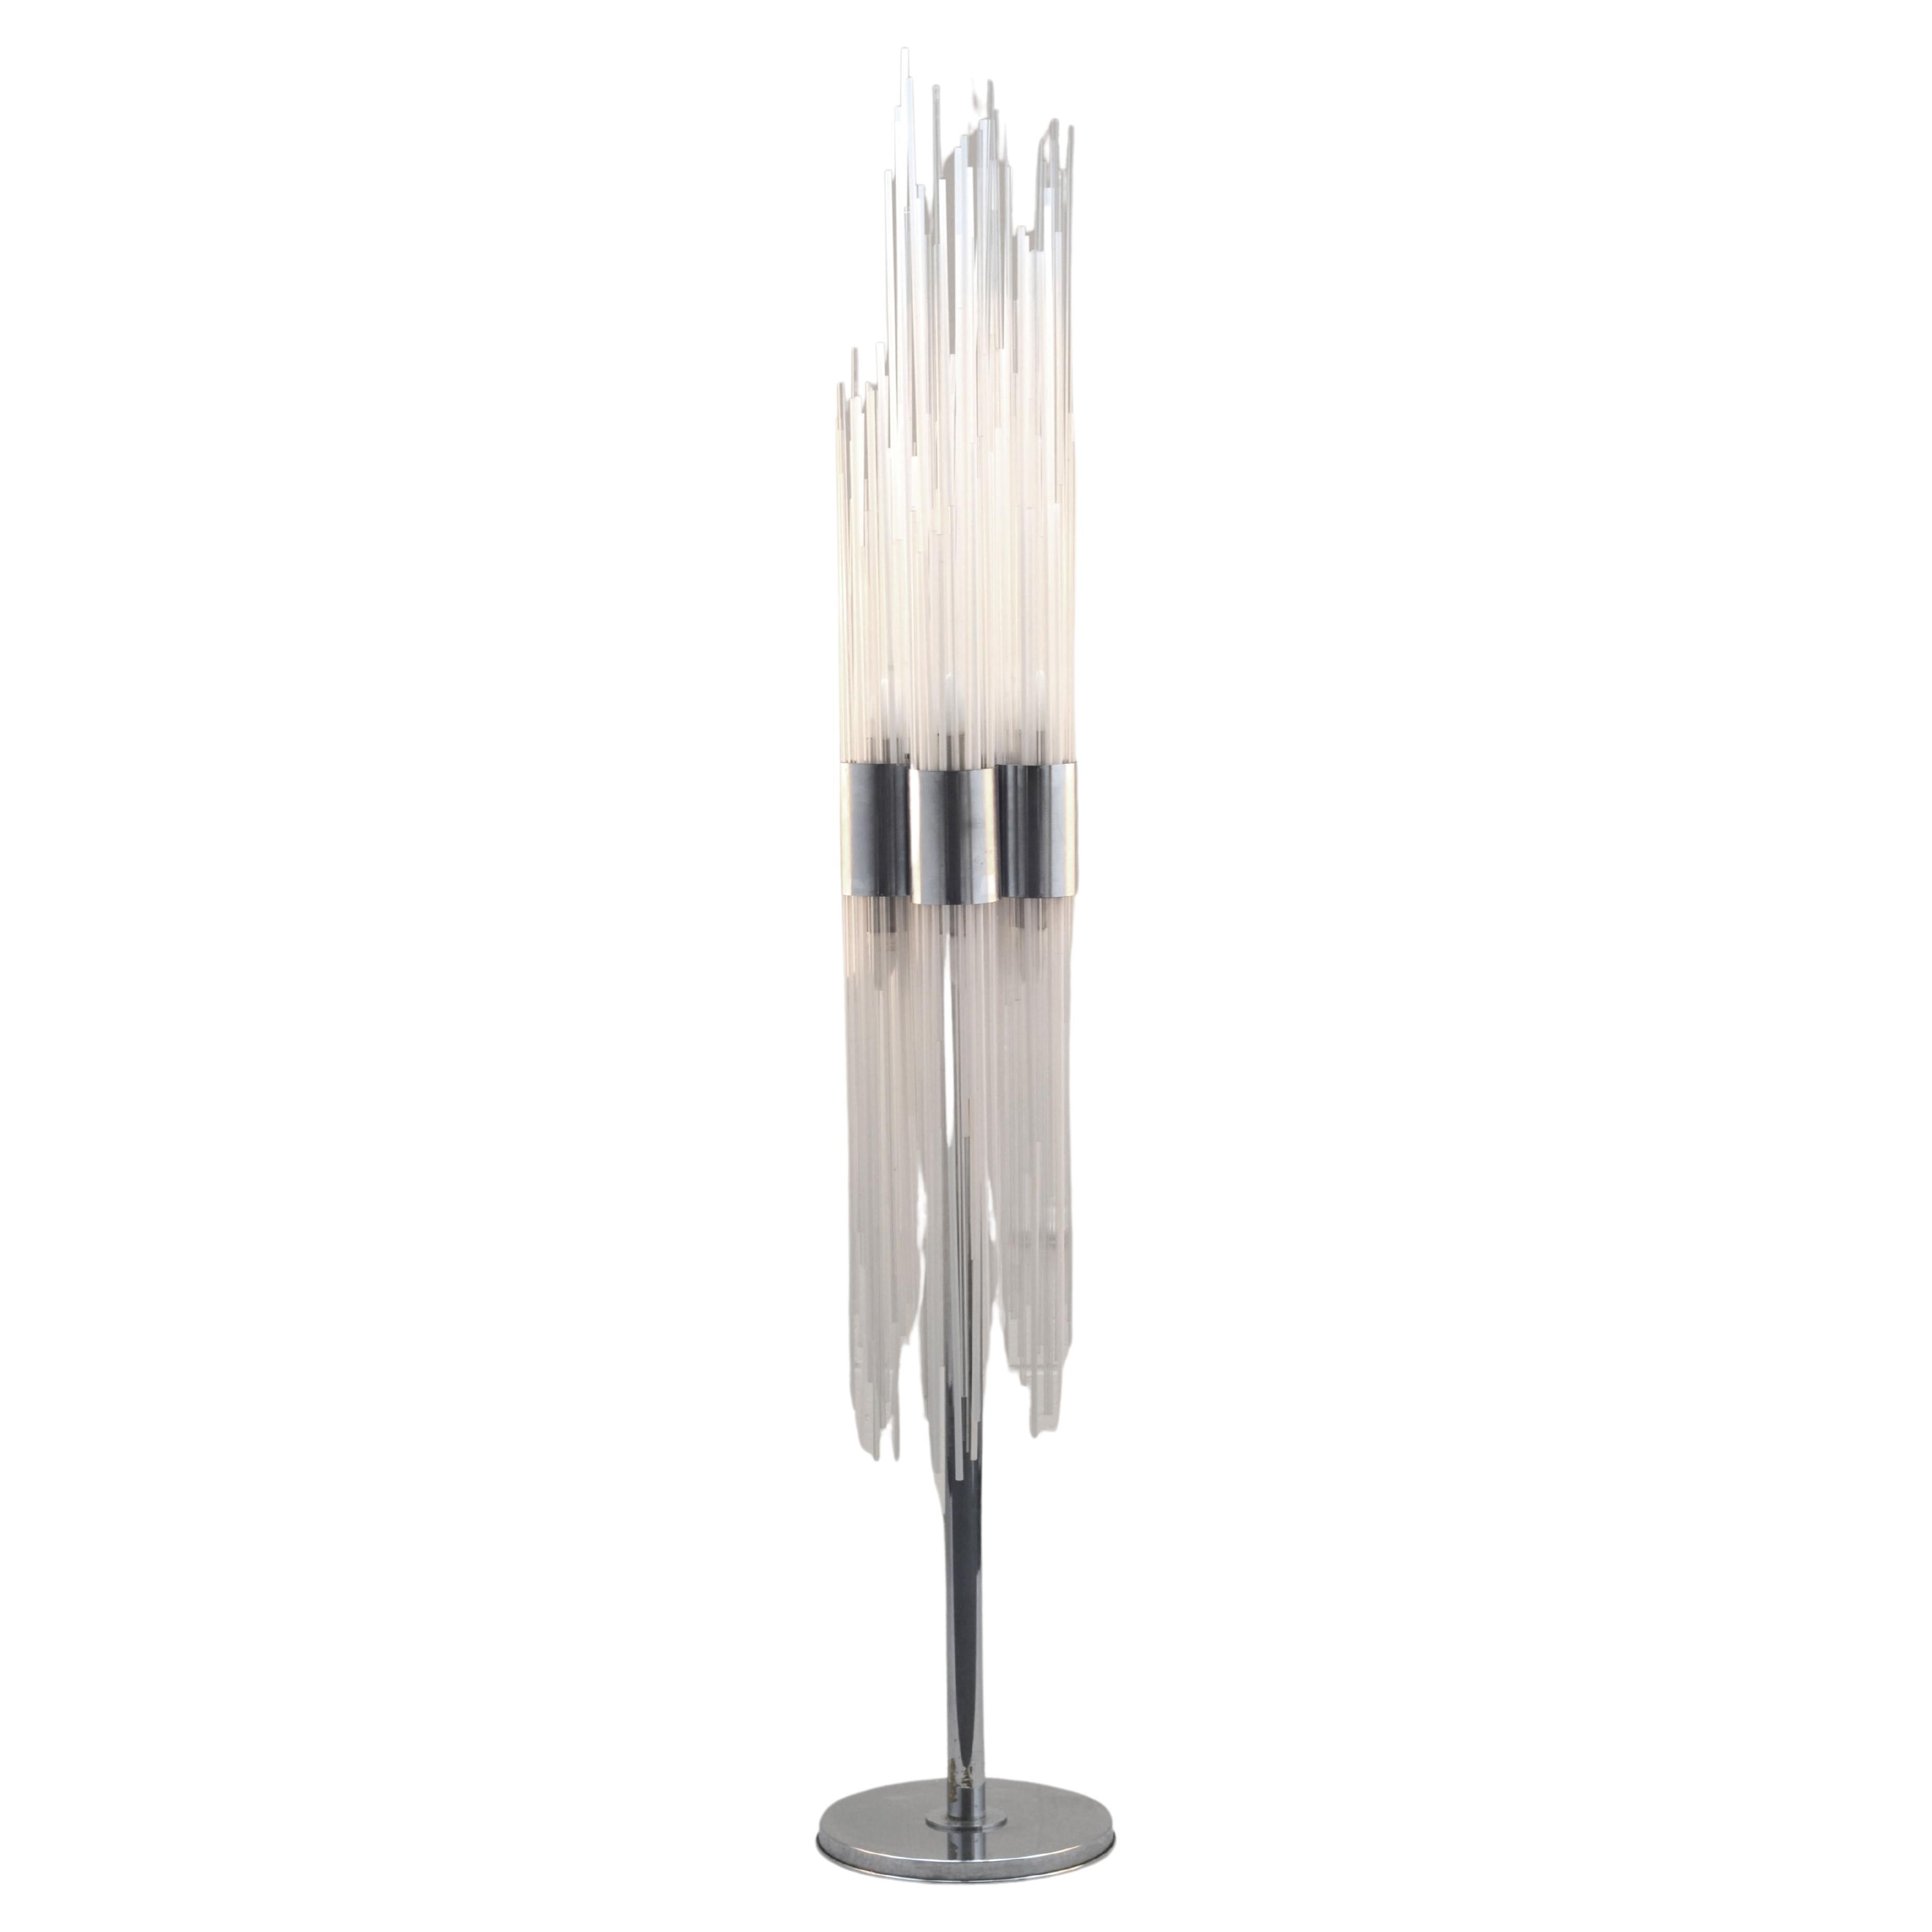 Extraordinary rare sculptural 1960's Venini floor lamp made of around 100 reeded Murano glass strands, set in a irregular formation of white and clear glass rods, vertically inserted into chrome rings that are attached to the chrome stand. The glass